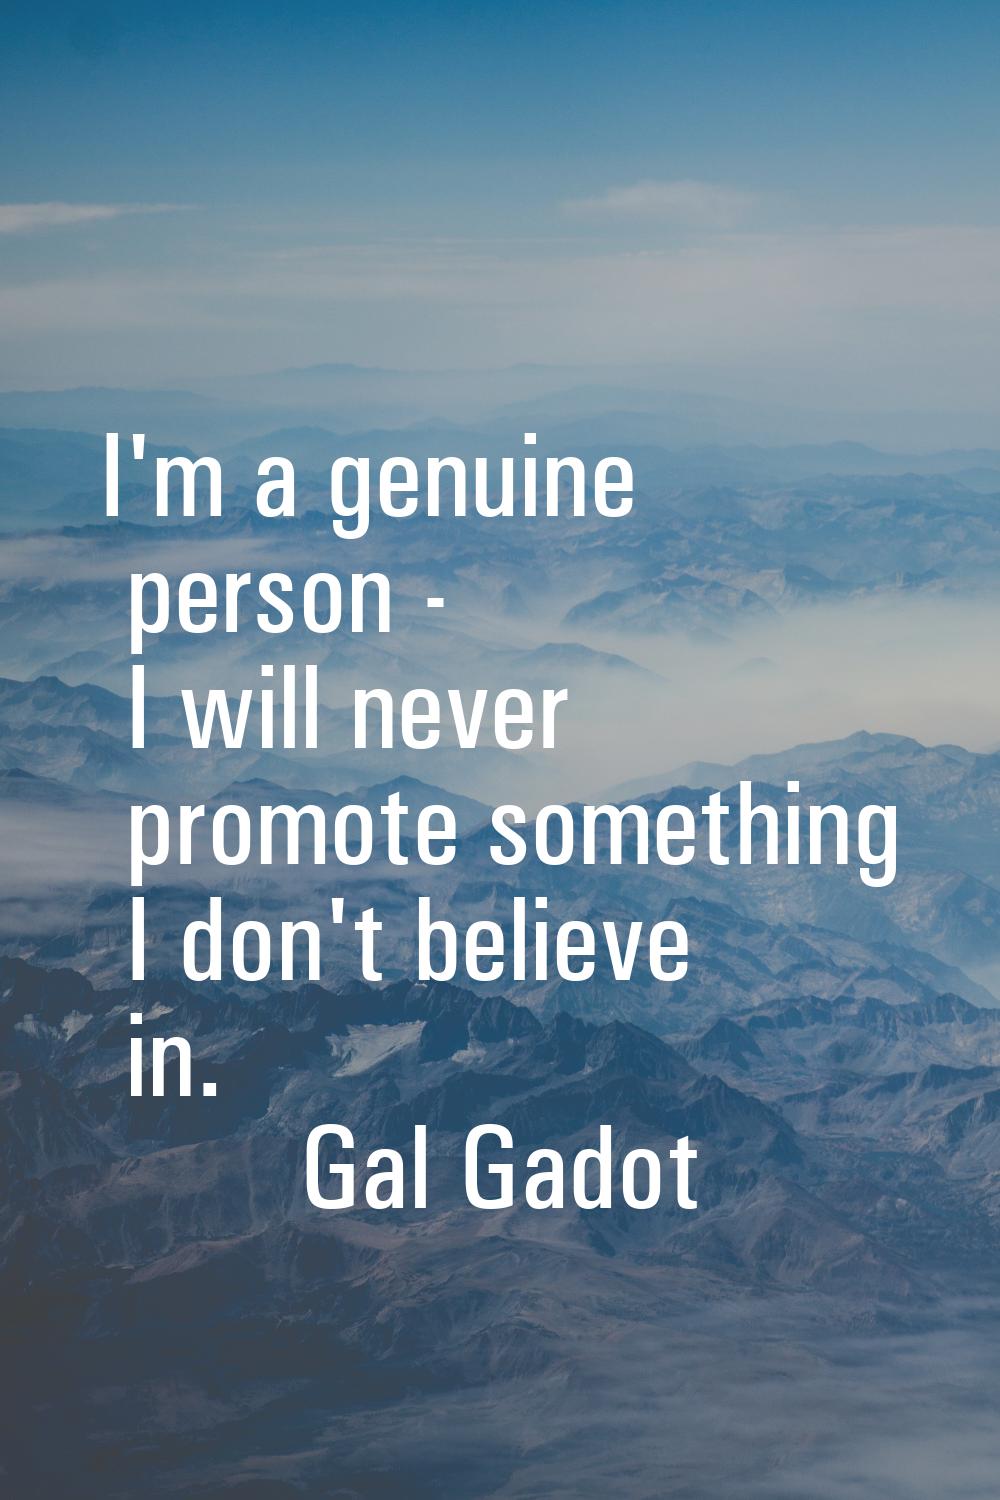 I'm a genuine person - I will never promote something I don't believe in.